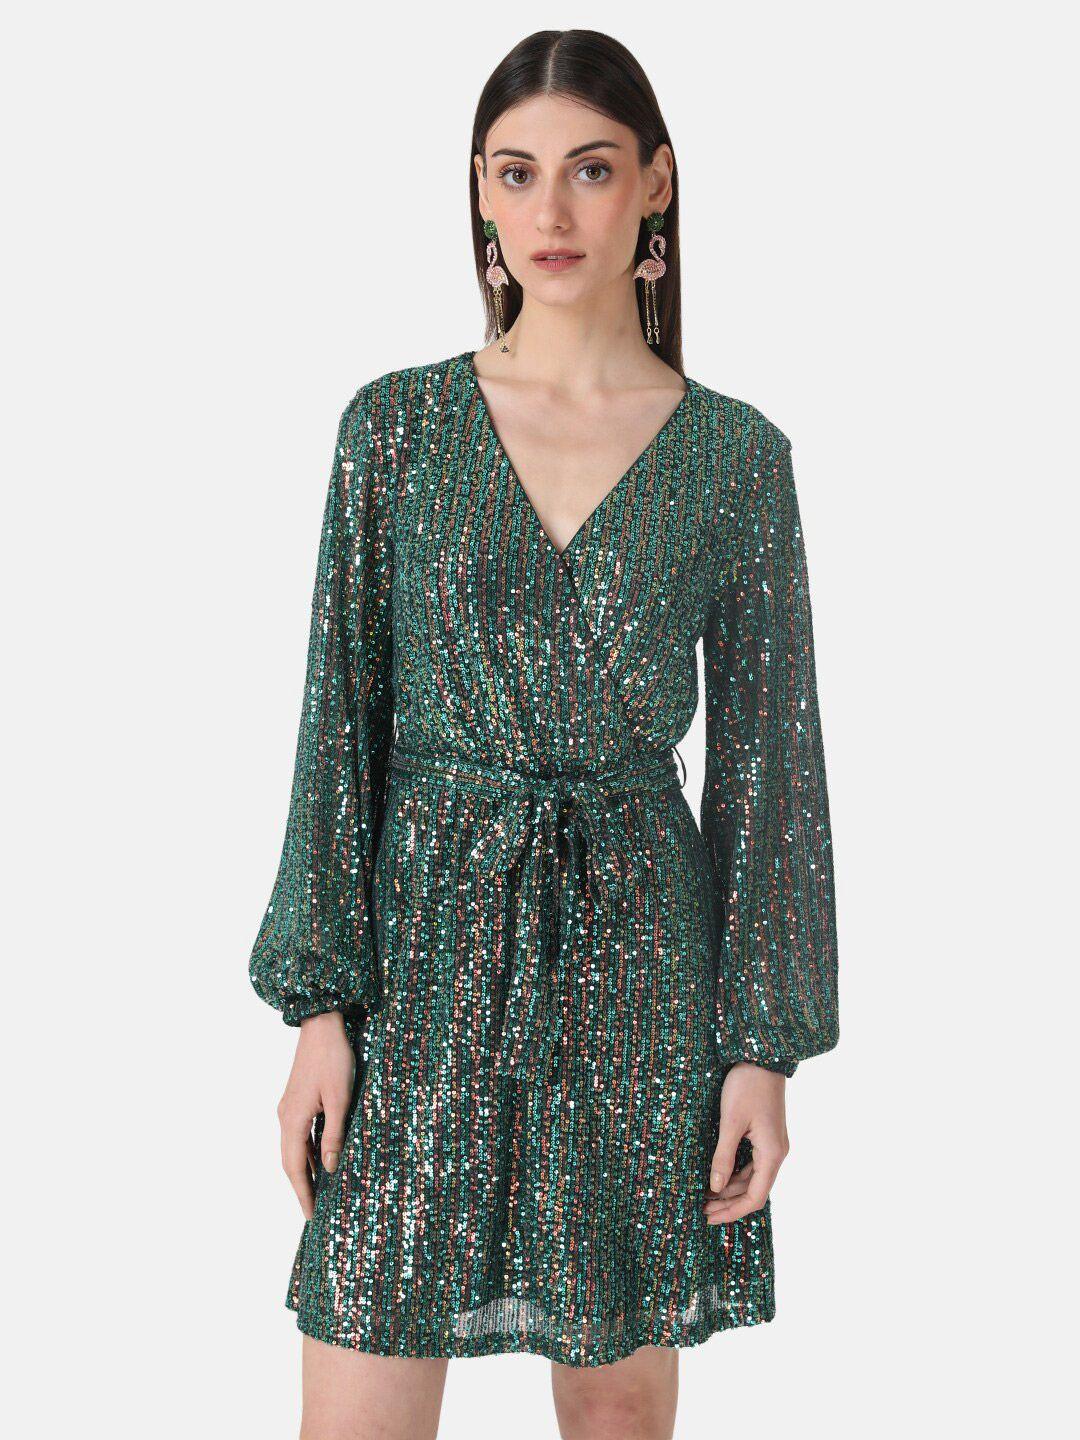 kazo embellished puff sleeves sequined detail party fit & flare dress